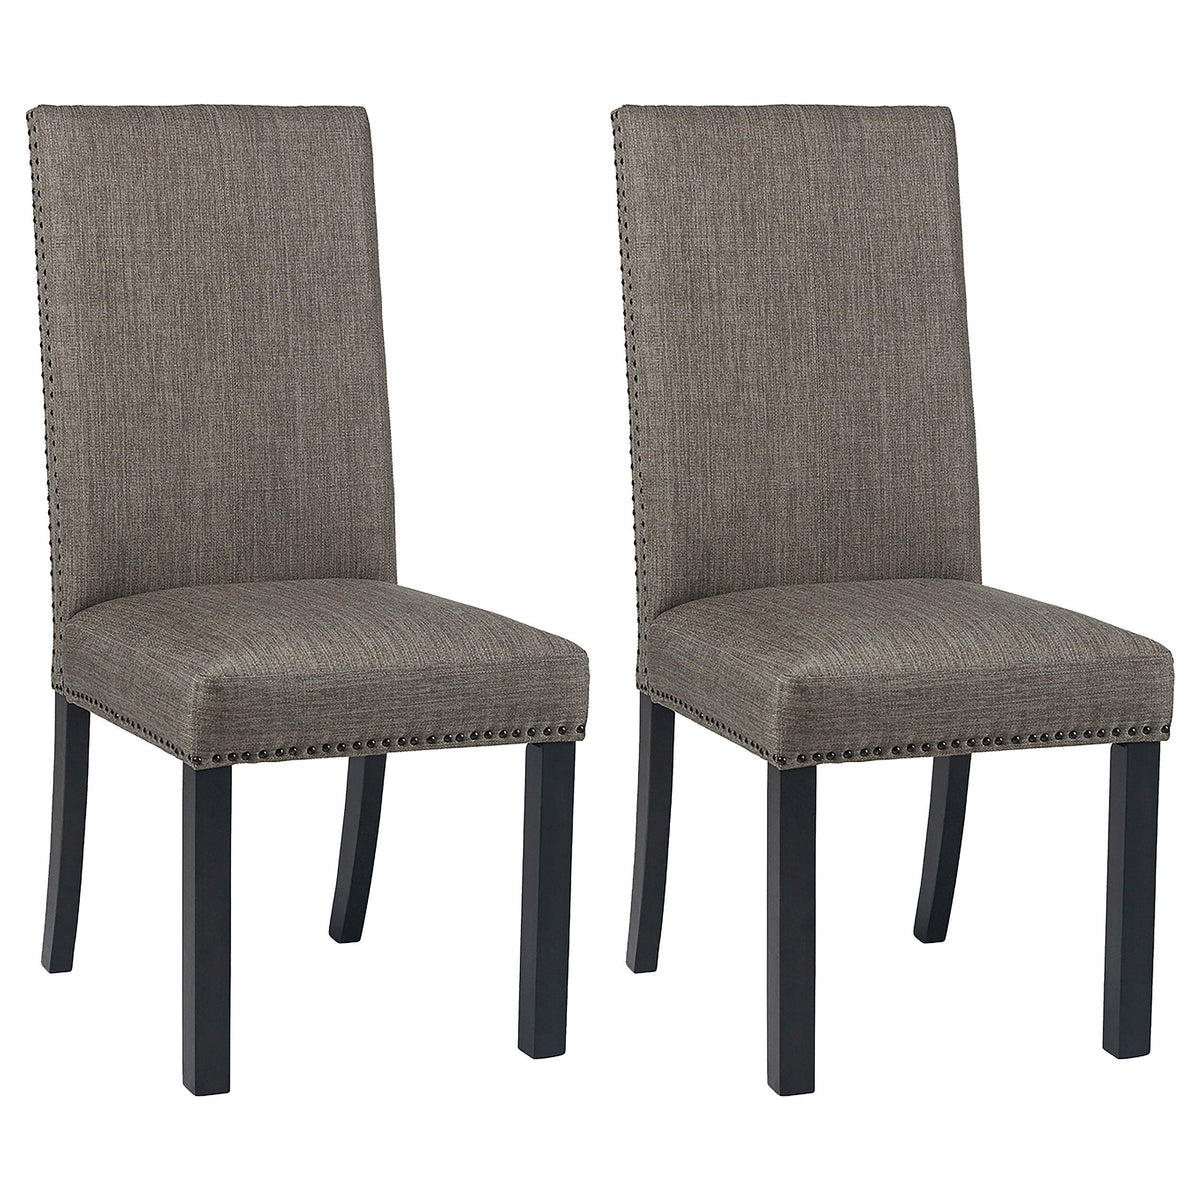 Hubbard Upholstered Side Chairs Charcoal (Set of 2)  Las Vegas Furniture Stores